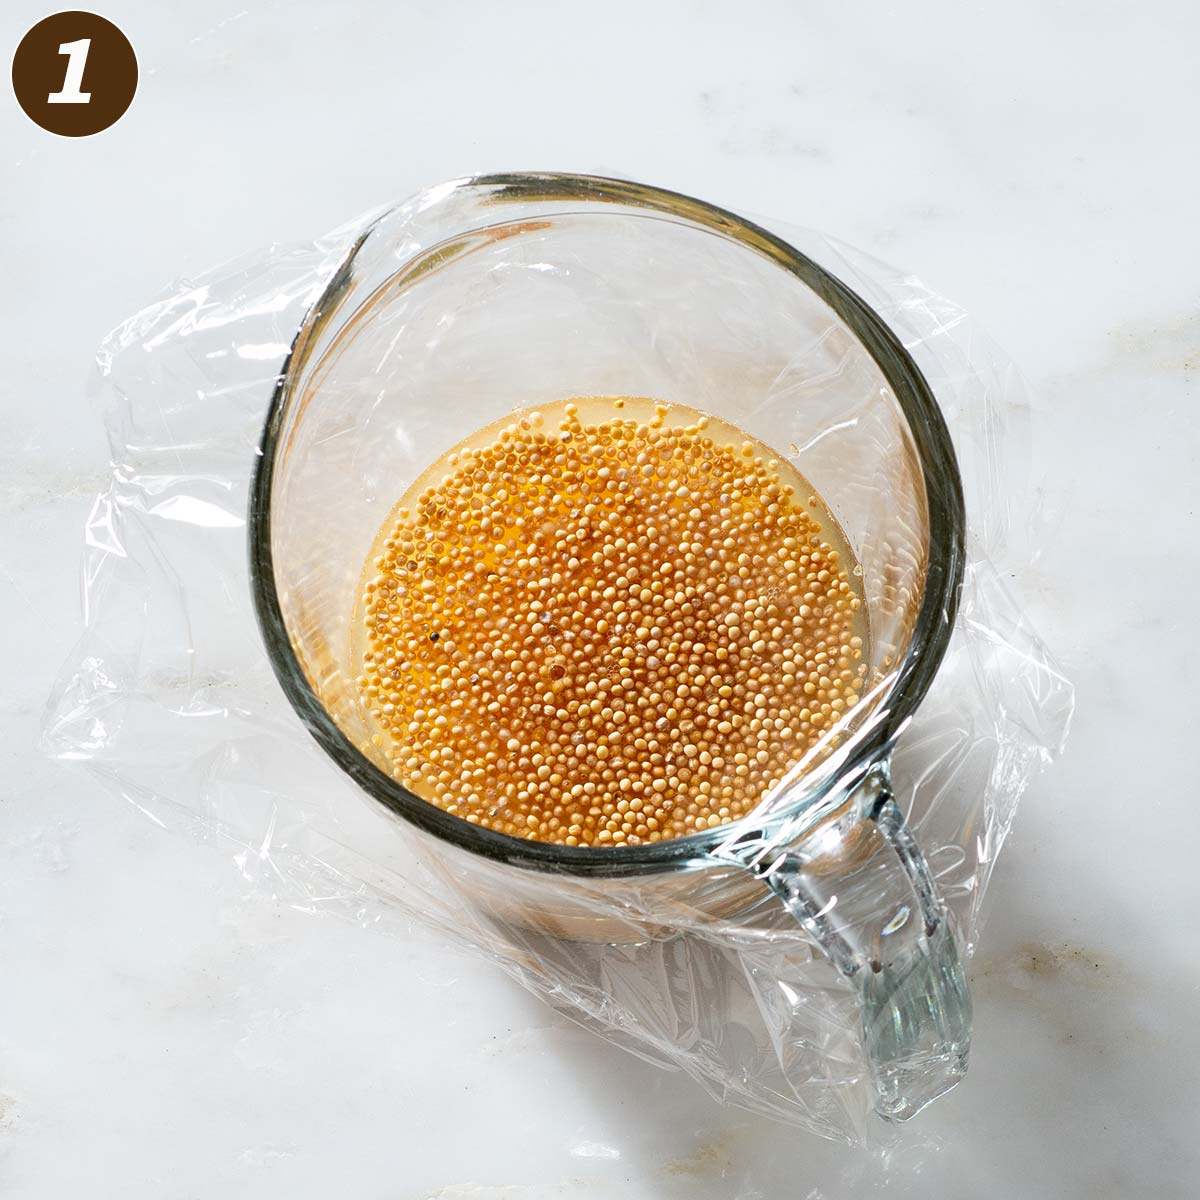 Mustard seeds and liquid in a glass measuring cup.